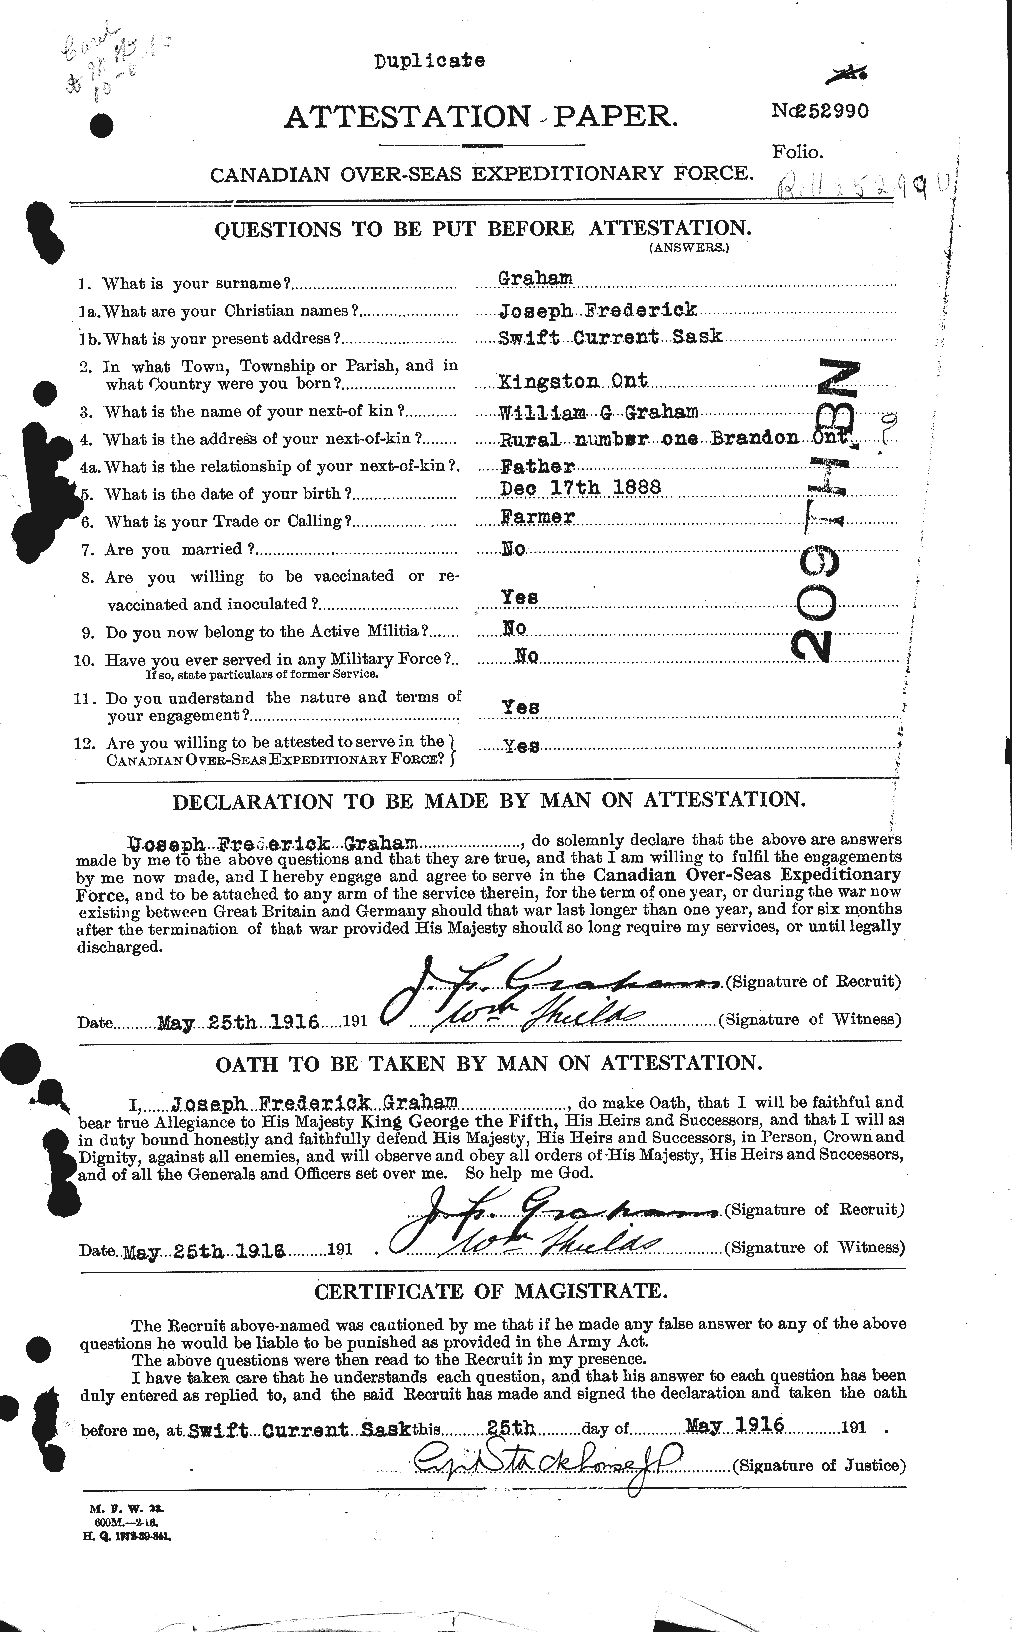 Personnel Records of the First World War - CEF 359246a